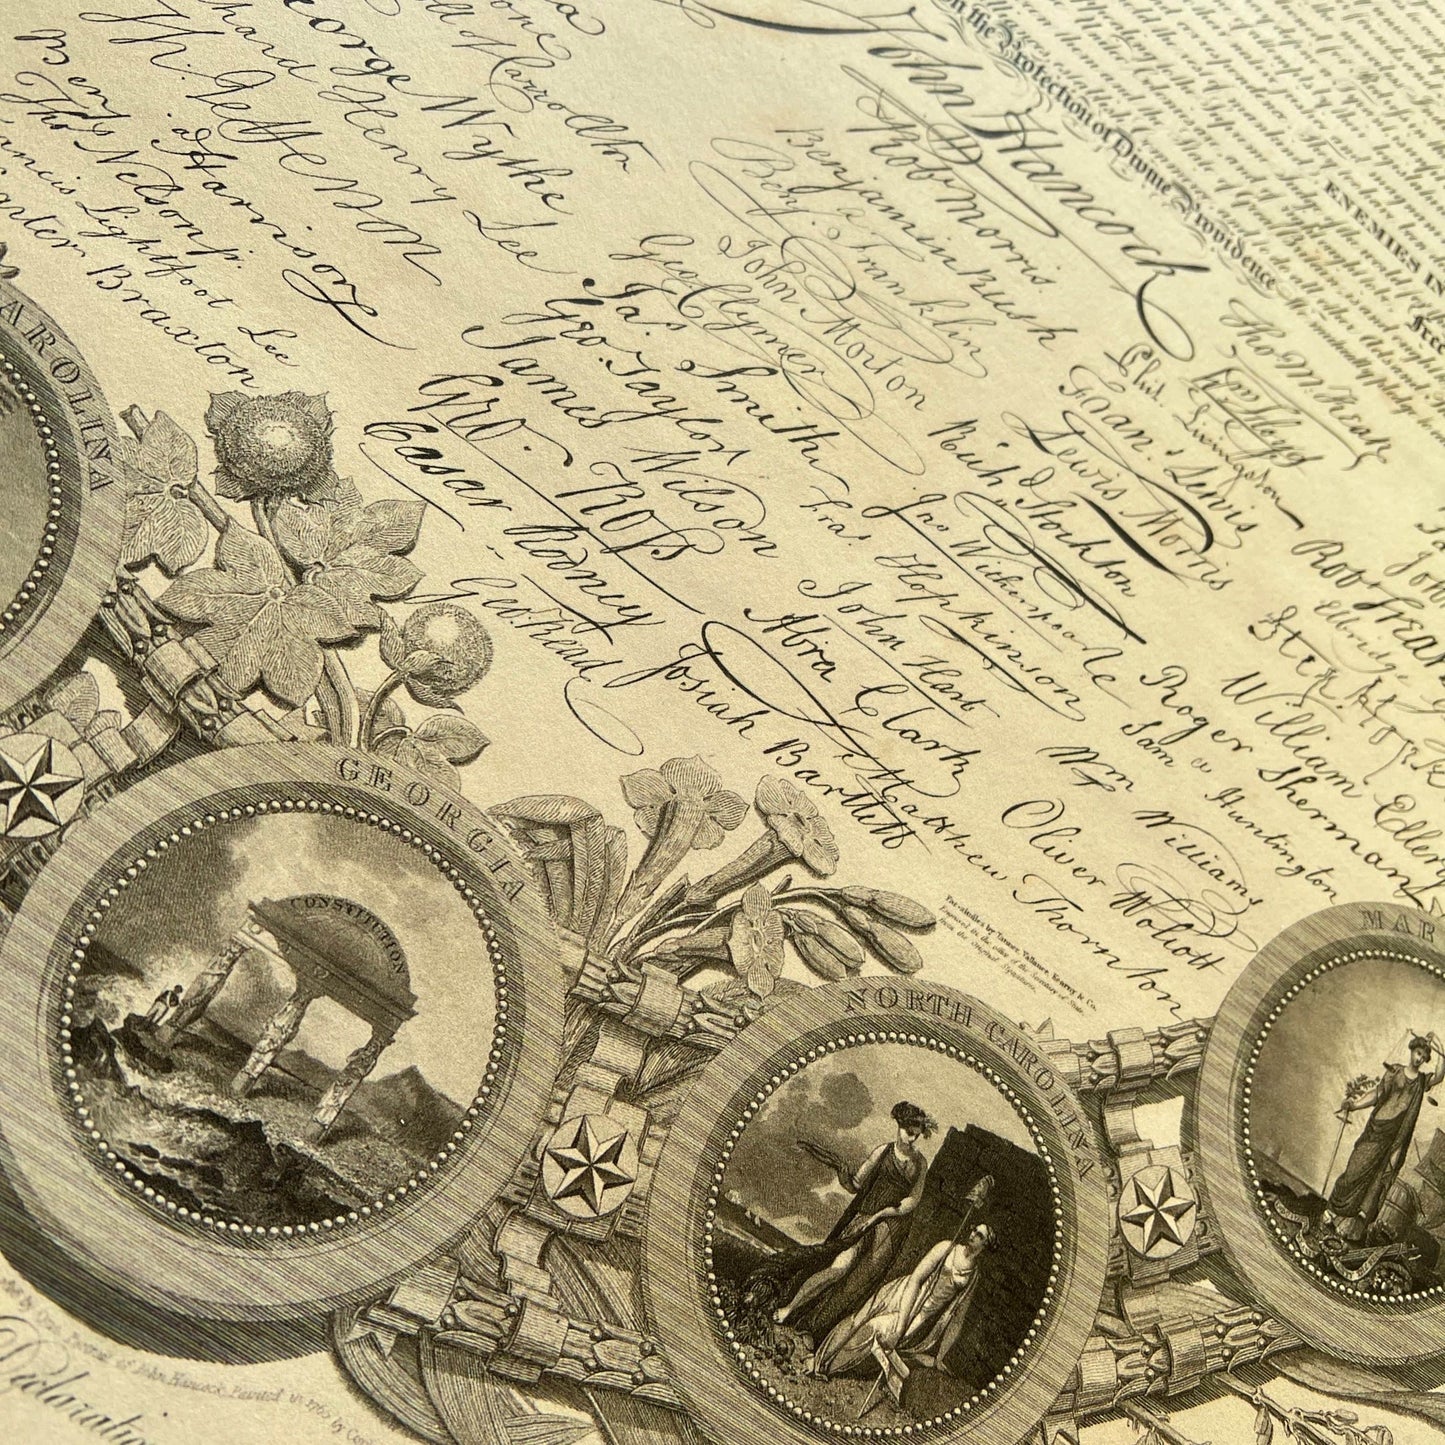 Close-up of signatures from Historic "Declaration of Independence" engraving by publisher John Binns Archival print from The HIstory List store